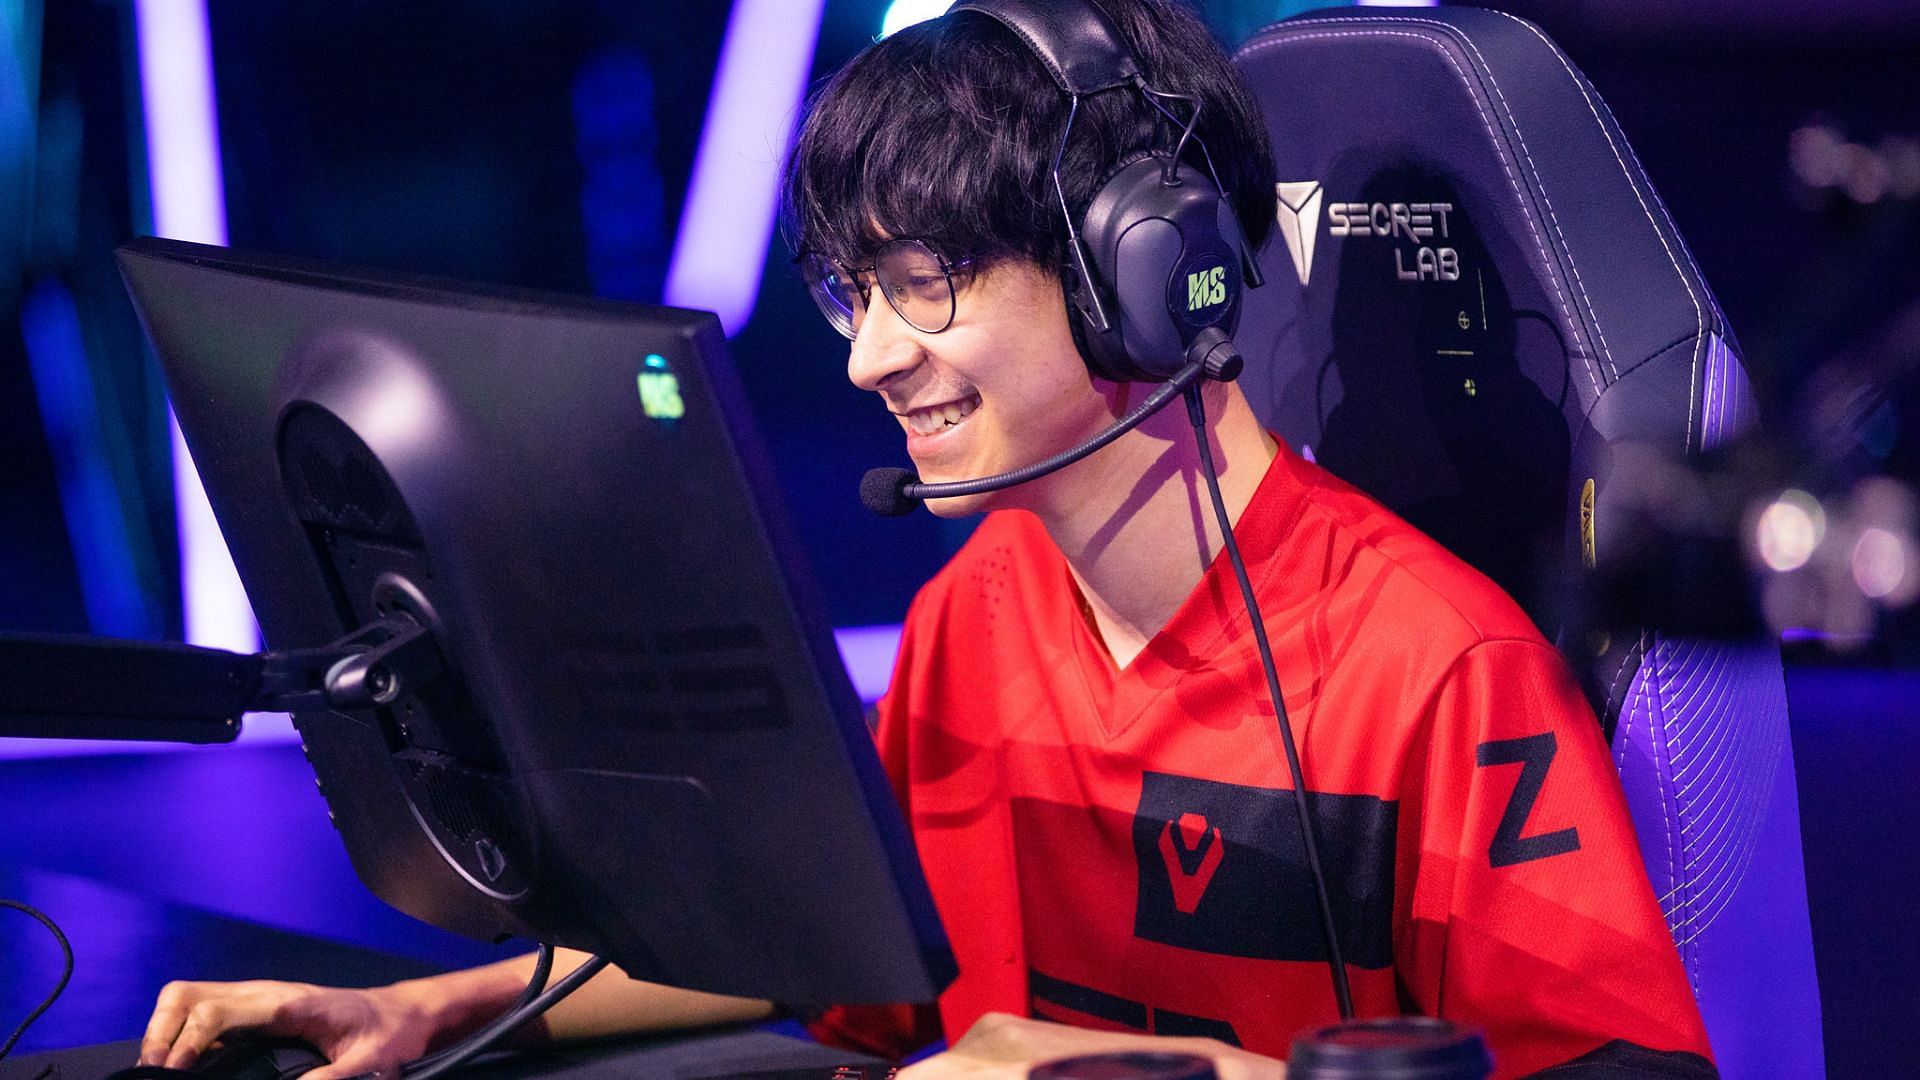 Tenz is a key member of the Sentinel team (Image via RIOT Games)